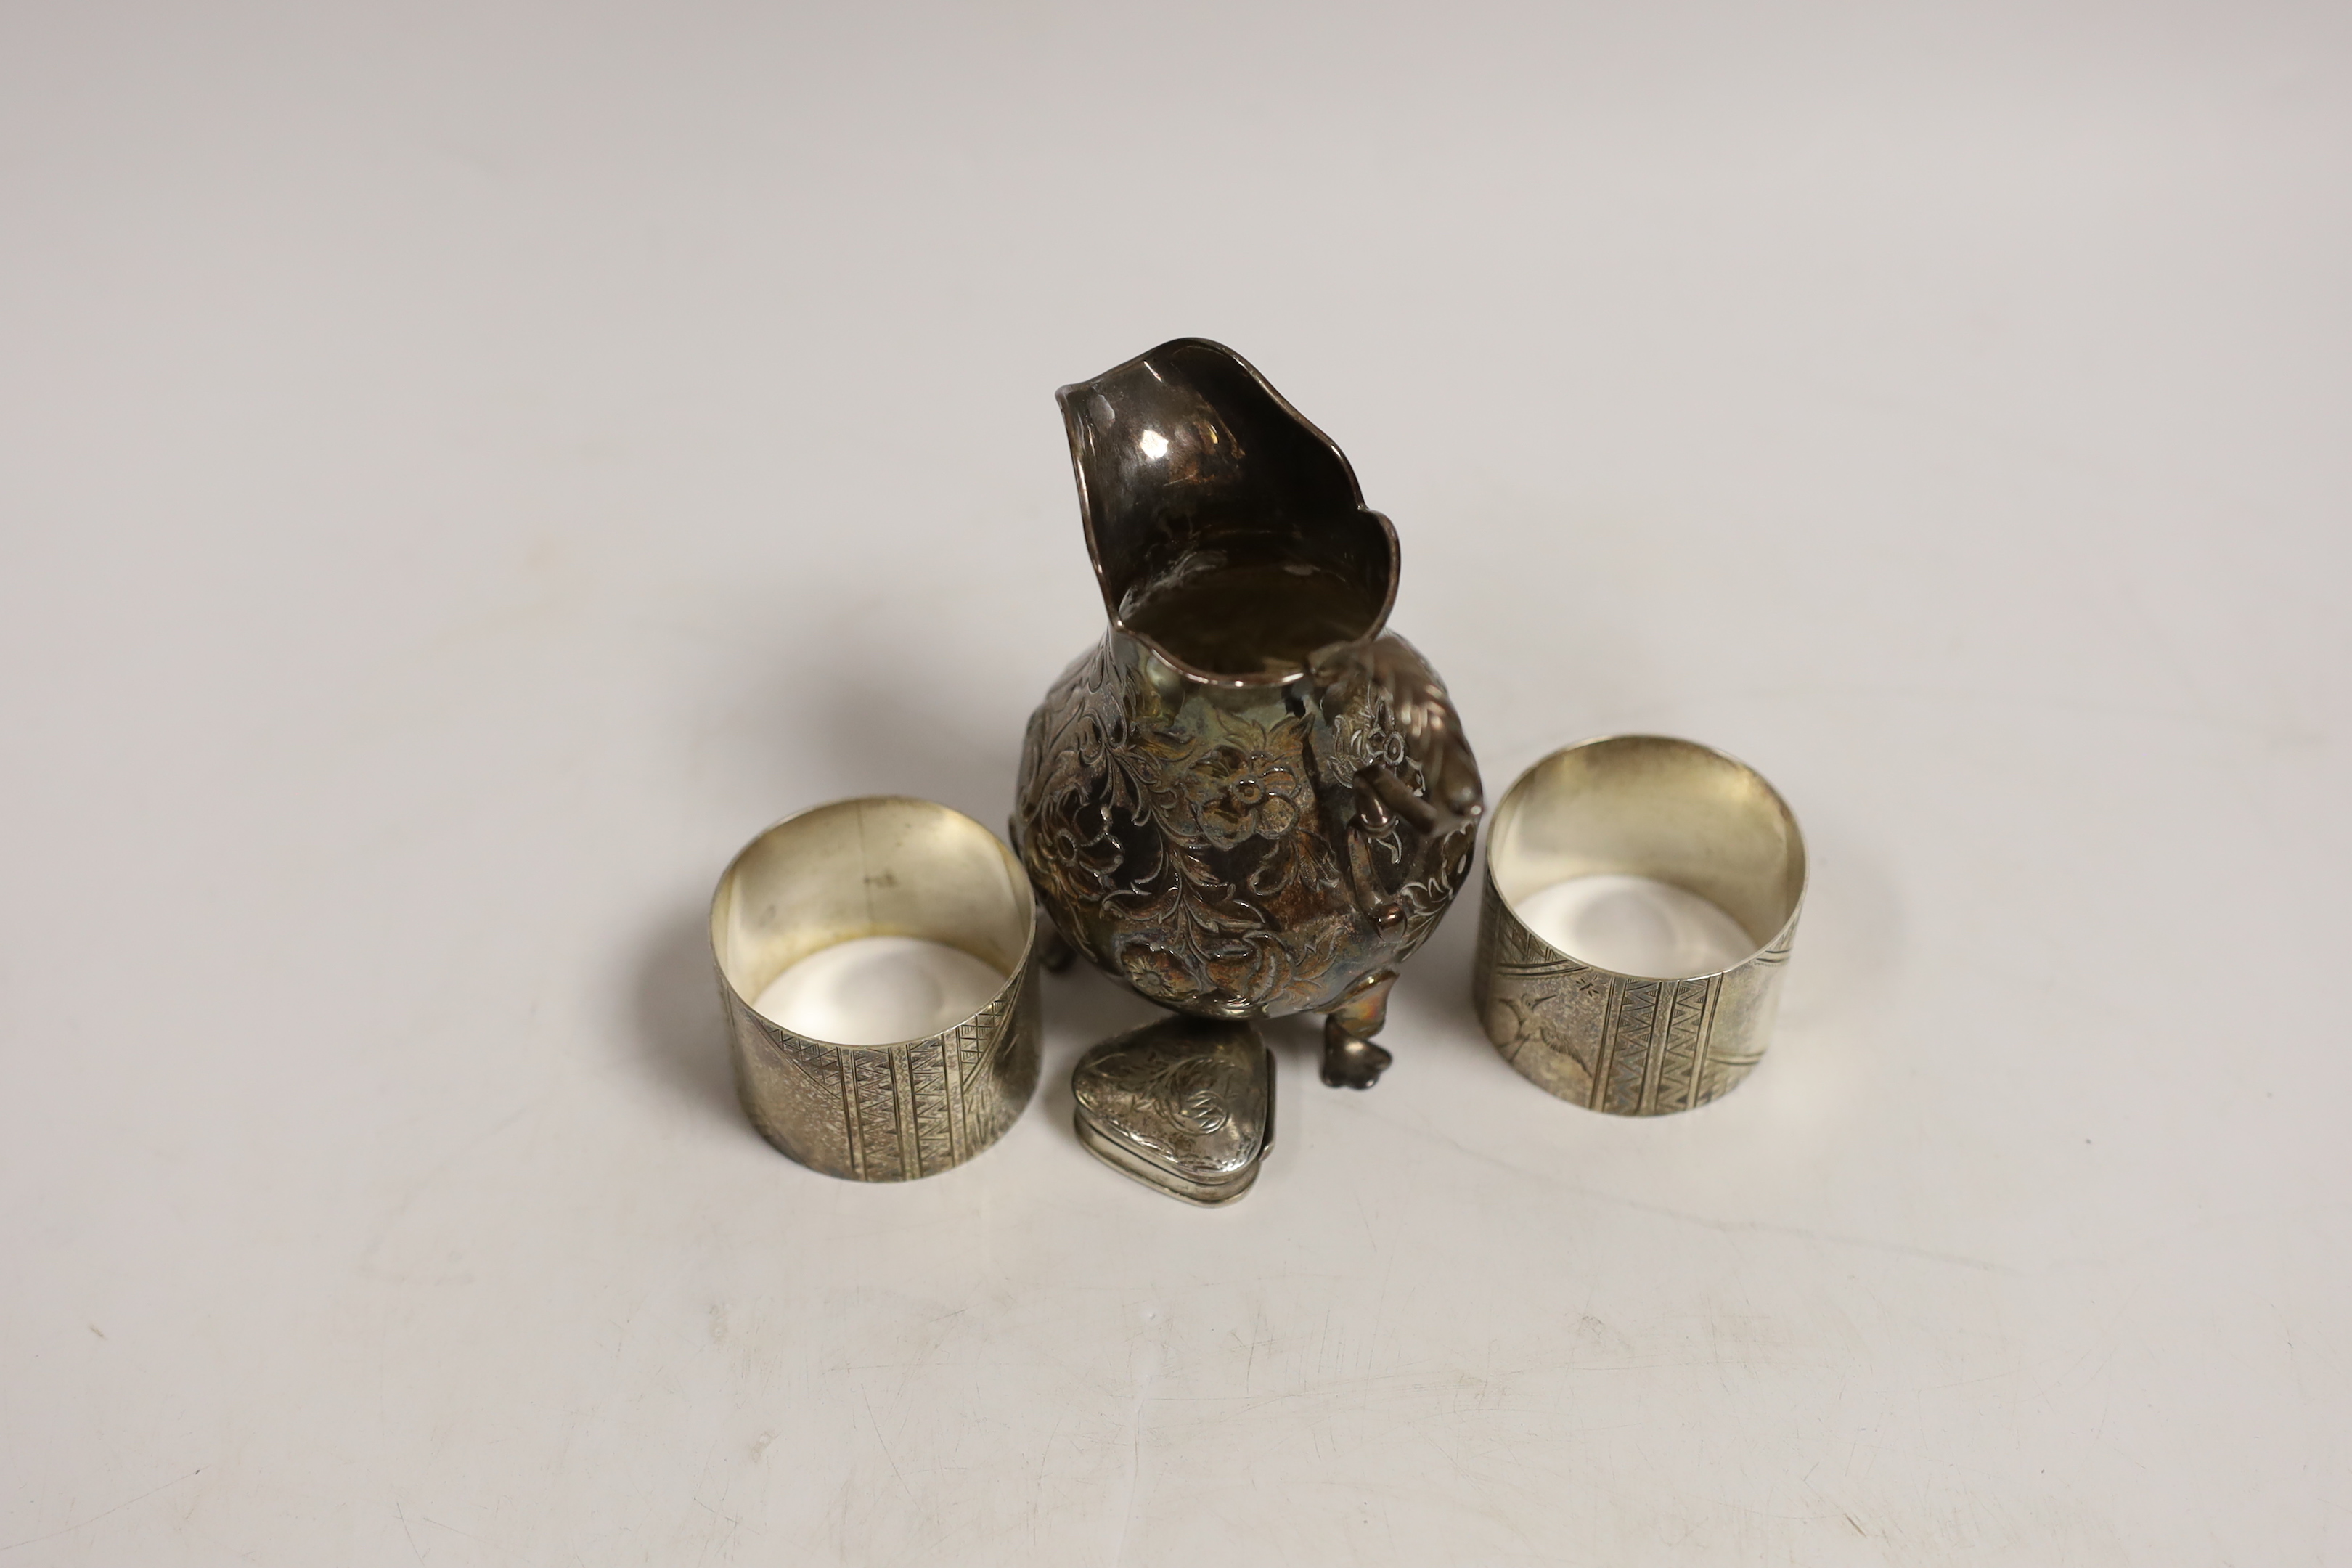 A Victorian silver baluster cream jug, London, 1846, 95mm, a pair of Victorian silver napkin rings engraved with aesthetic decoration, Charles Edwards, London, 1880 and a modern silver pill box.